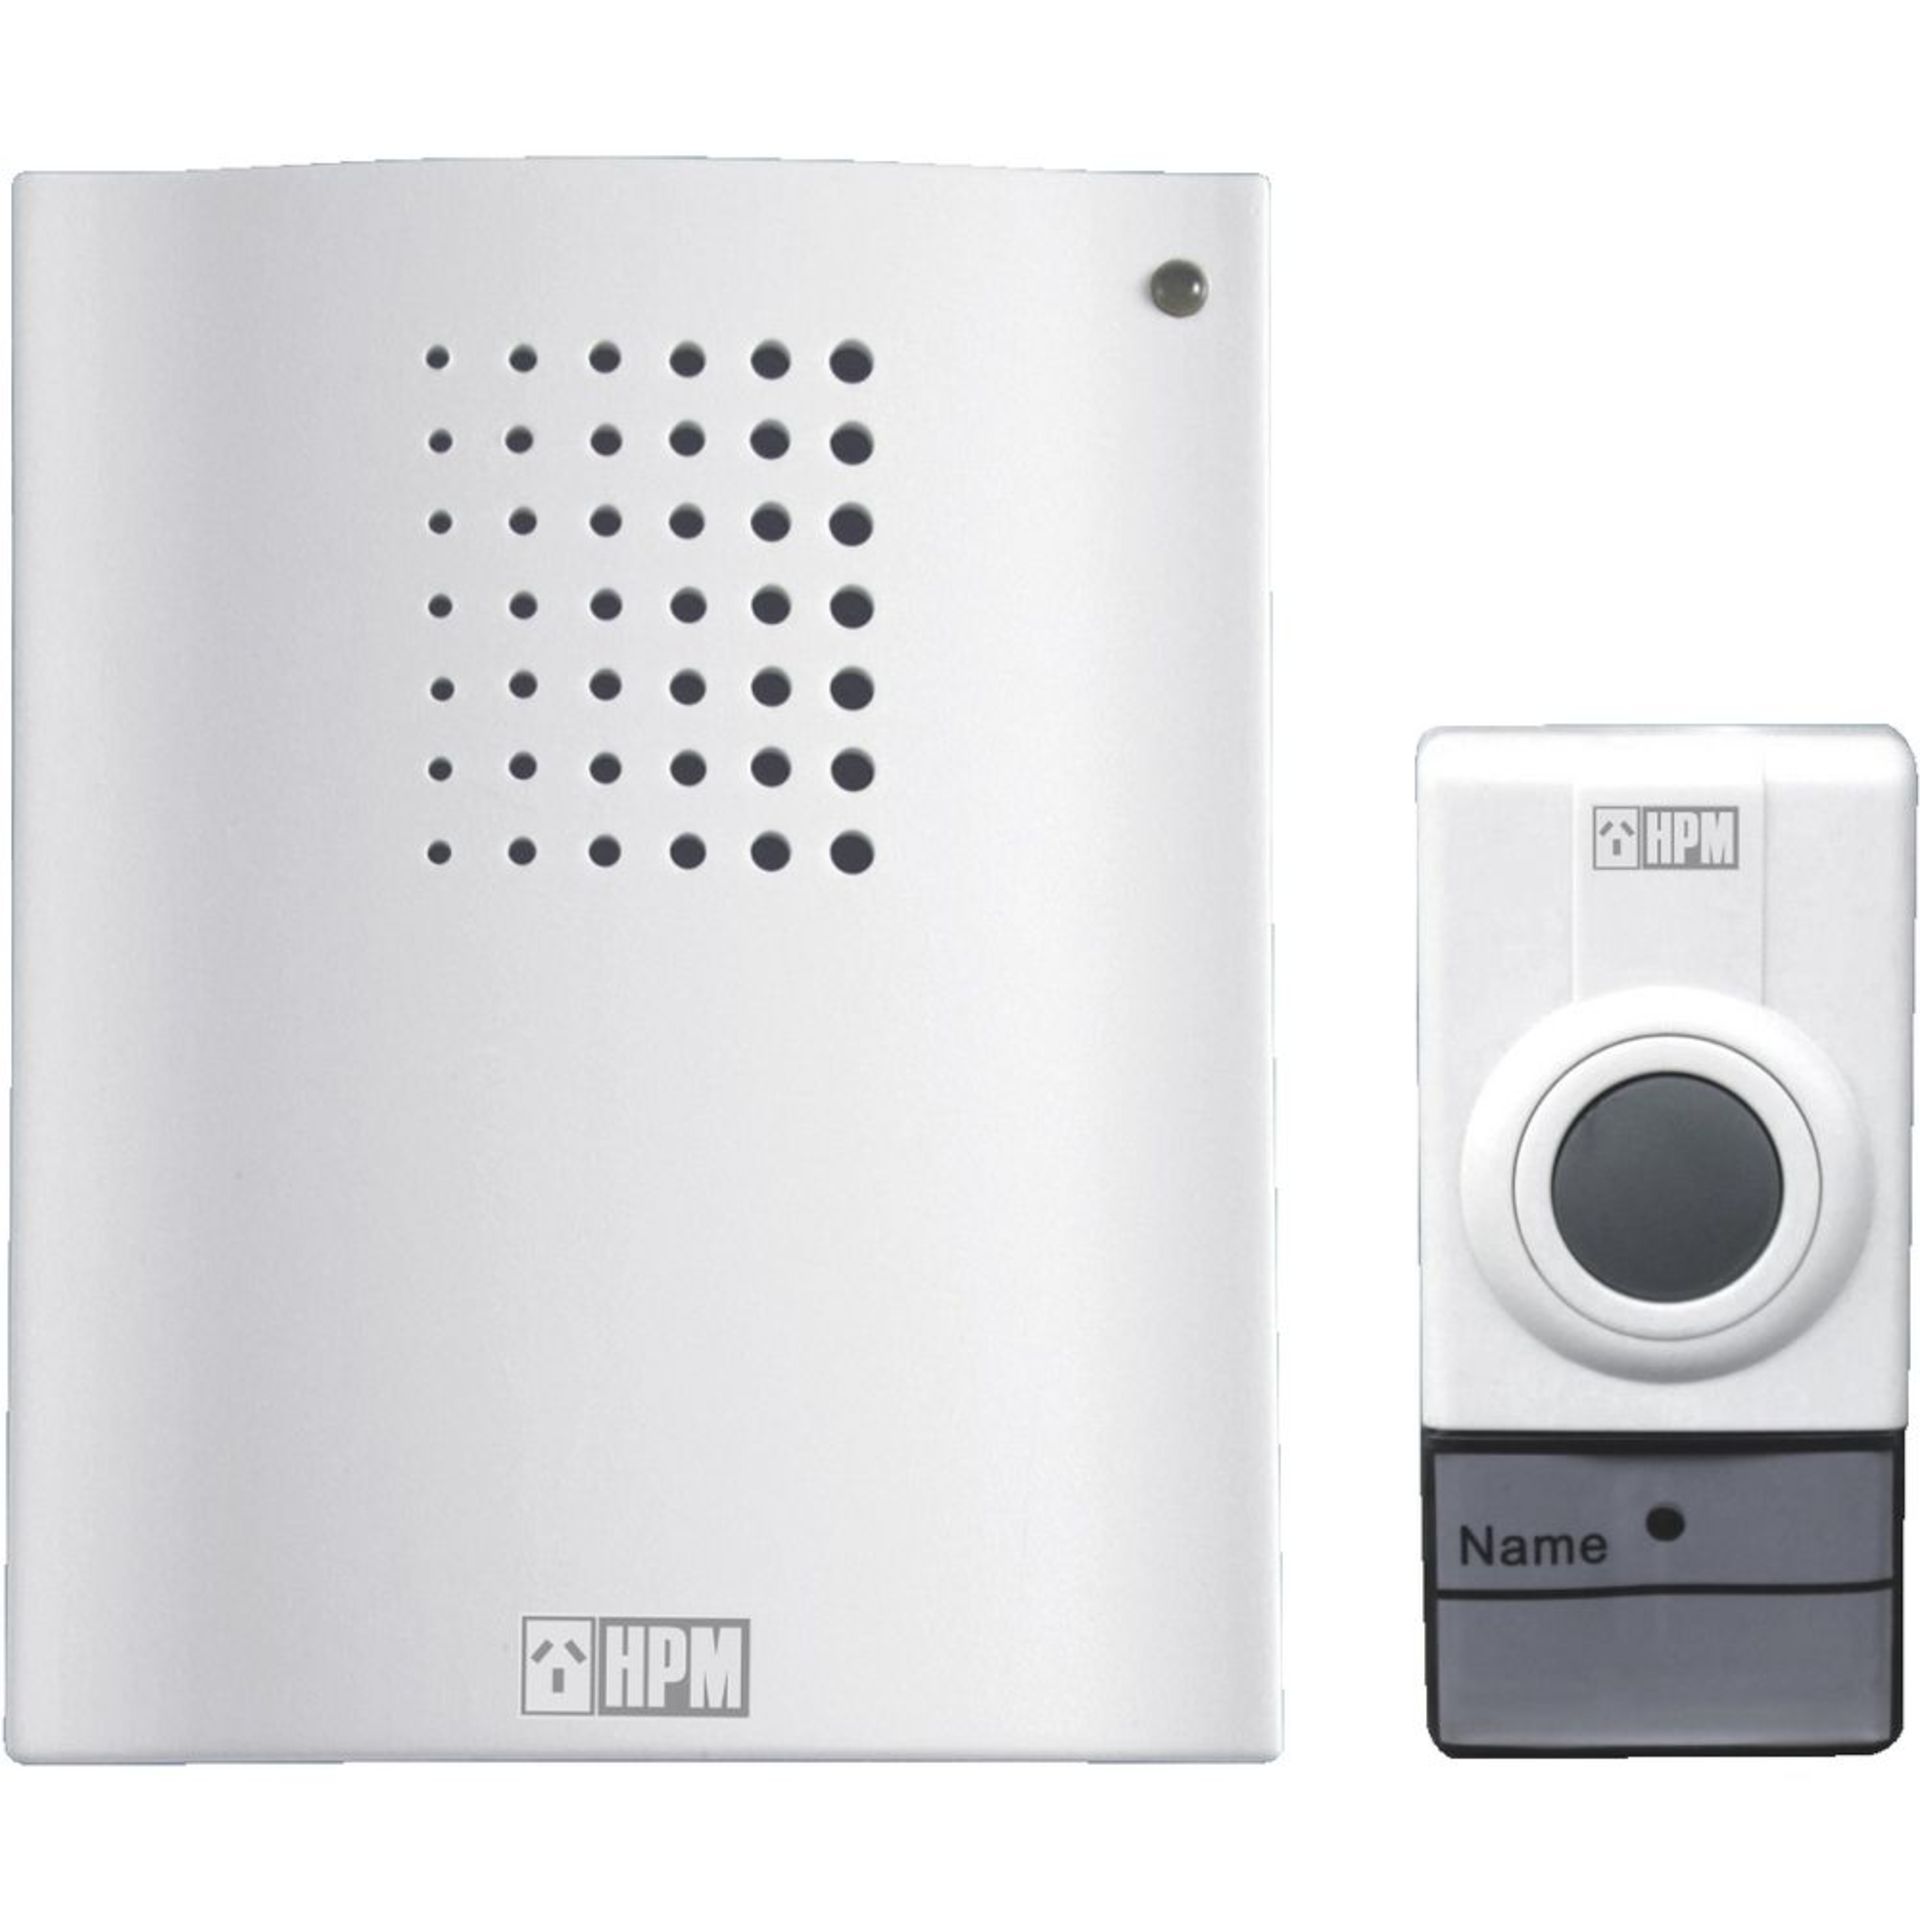 V *TRADE QTY* Brand New Wireless Digital Twin Doorchime - Battery operated X 7 YOUR BID PRICE TO